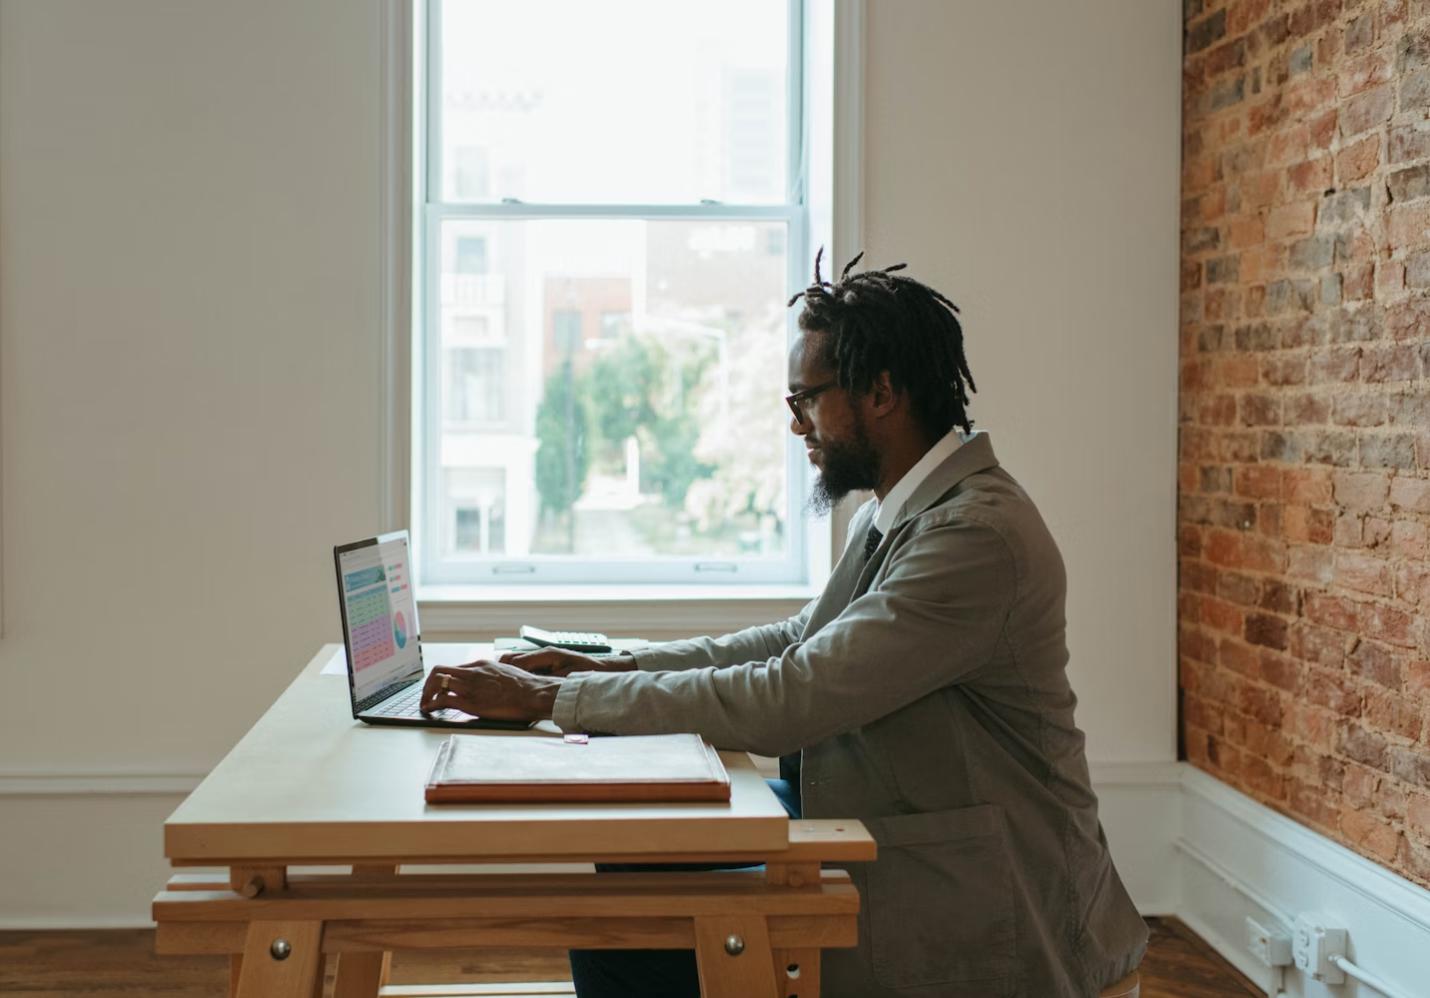 The image shows a man with dreadlocks and glasses, dressed in a casual yet professional attire, sitting at a wooden desk in a bright room with a large window